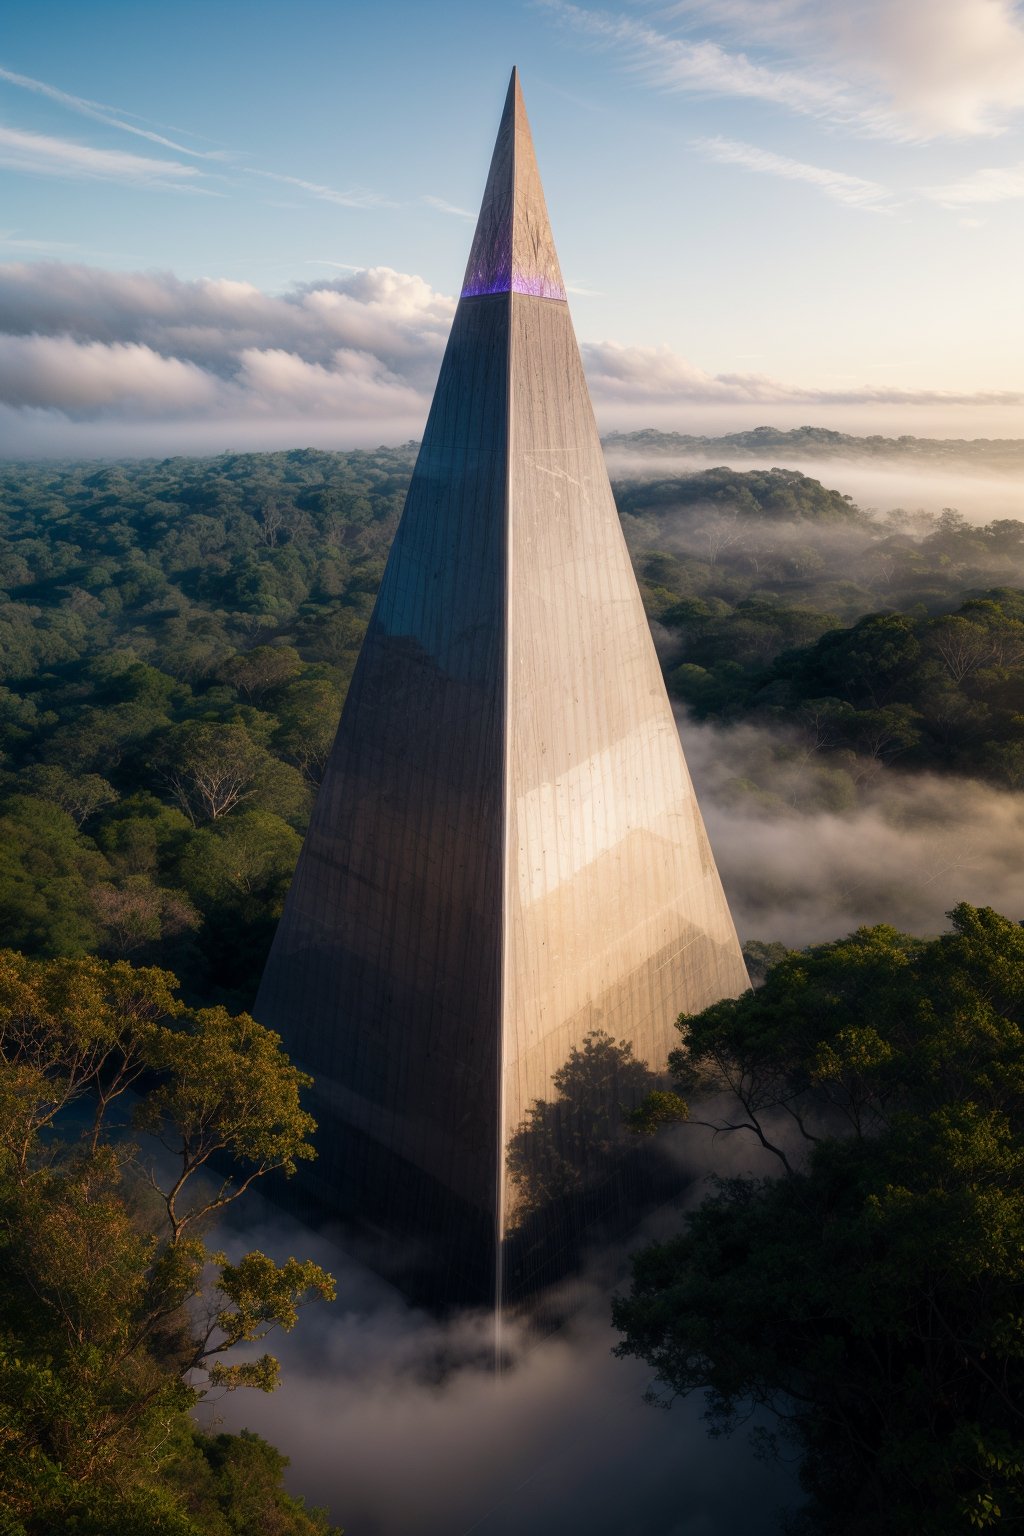 

glass, purple prismatic pyramid, rainforest canopy, bursting, towering, tree tops, misty, black clouds, etherial mist, top view












